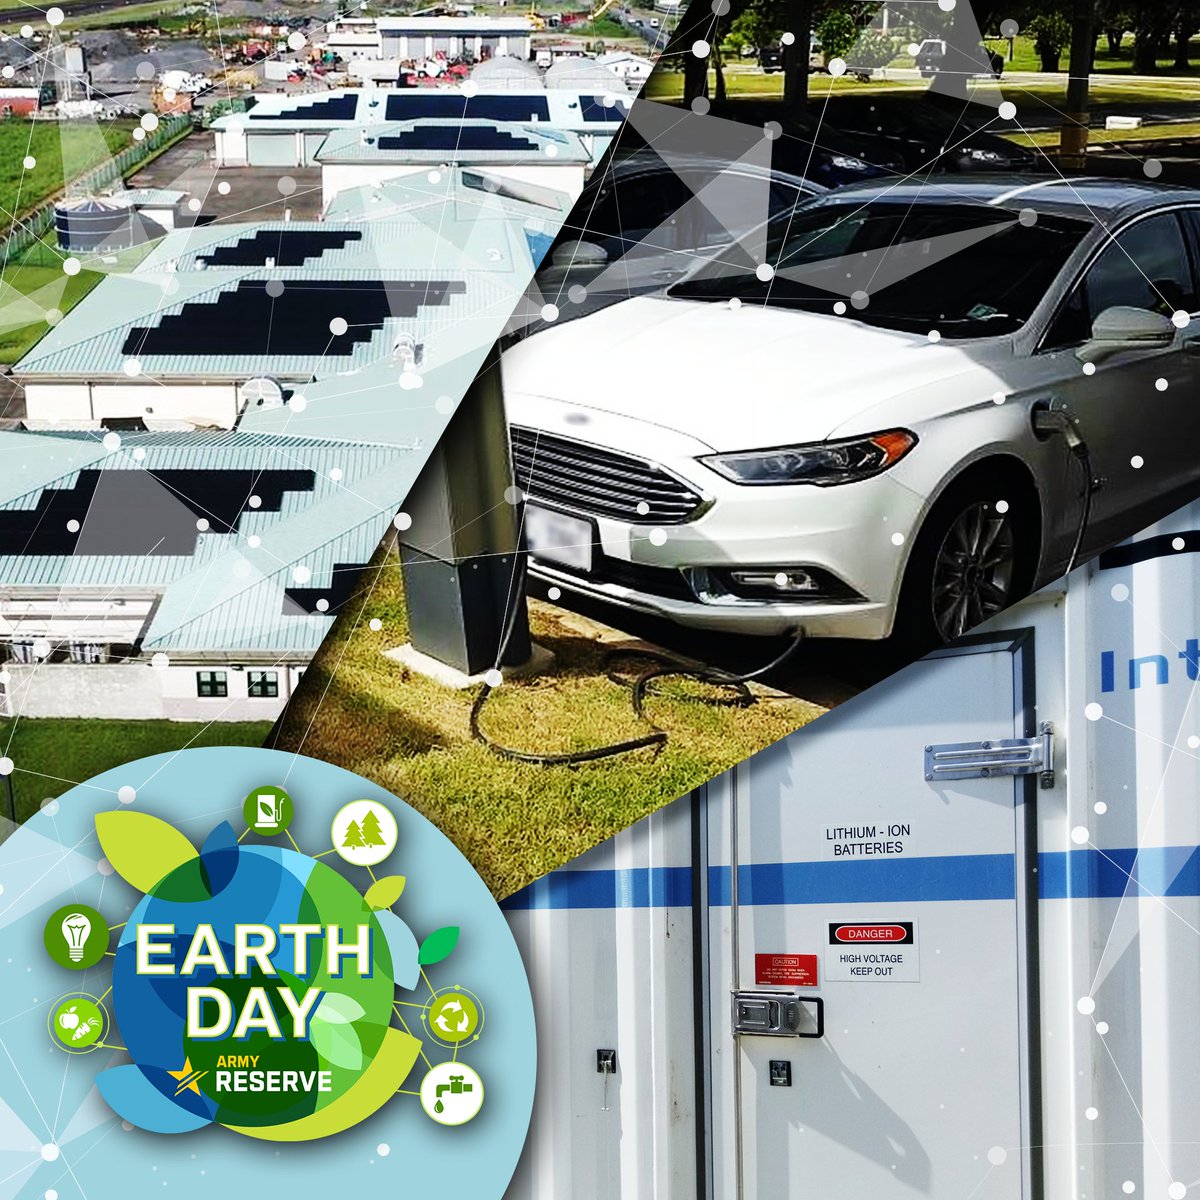 The @USArmyReserve is combatting climate by  implementing solutions like electric microgrids, battery storage, building control systems, water conservation and efficiency measures, and is transitioning to a 100% zero emission non-tactical vehicle fleet. #EarthDay #PowertoWin